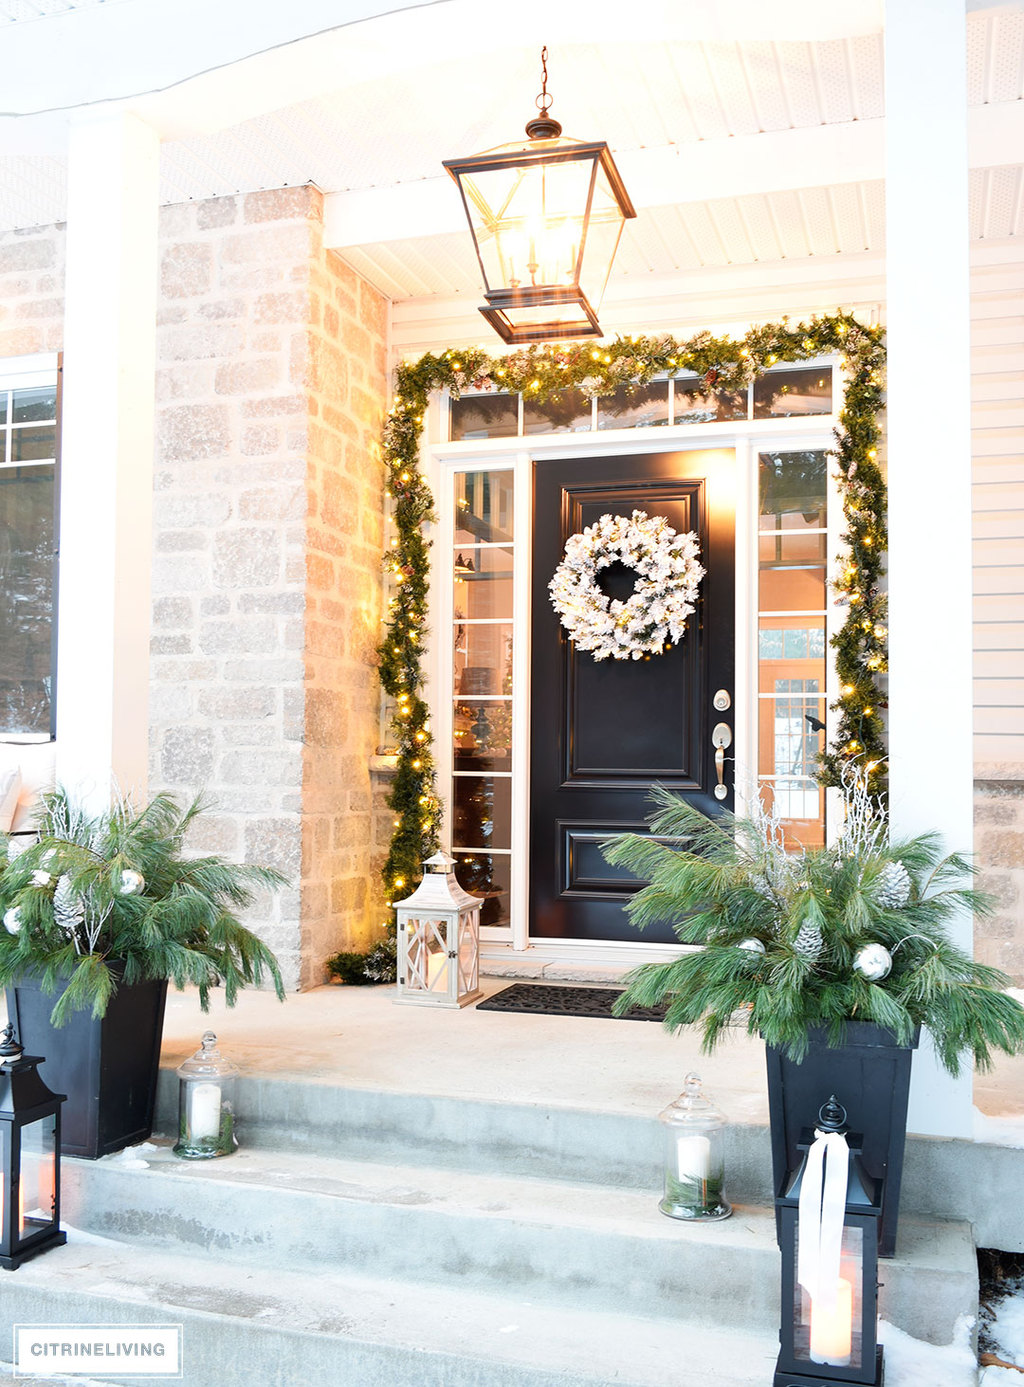 CITRINELIVING -OUTDOOR CHRISTMAS DECOR AND NEW LIGHTING